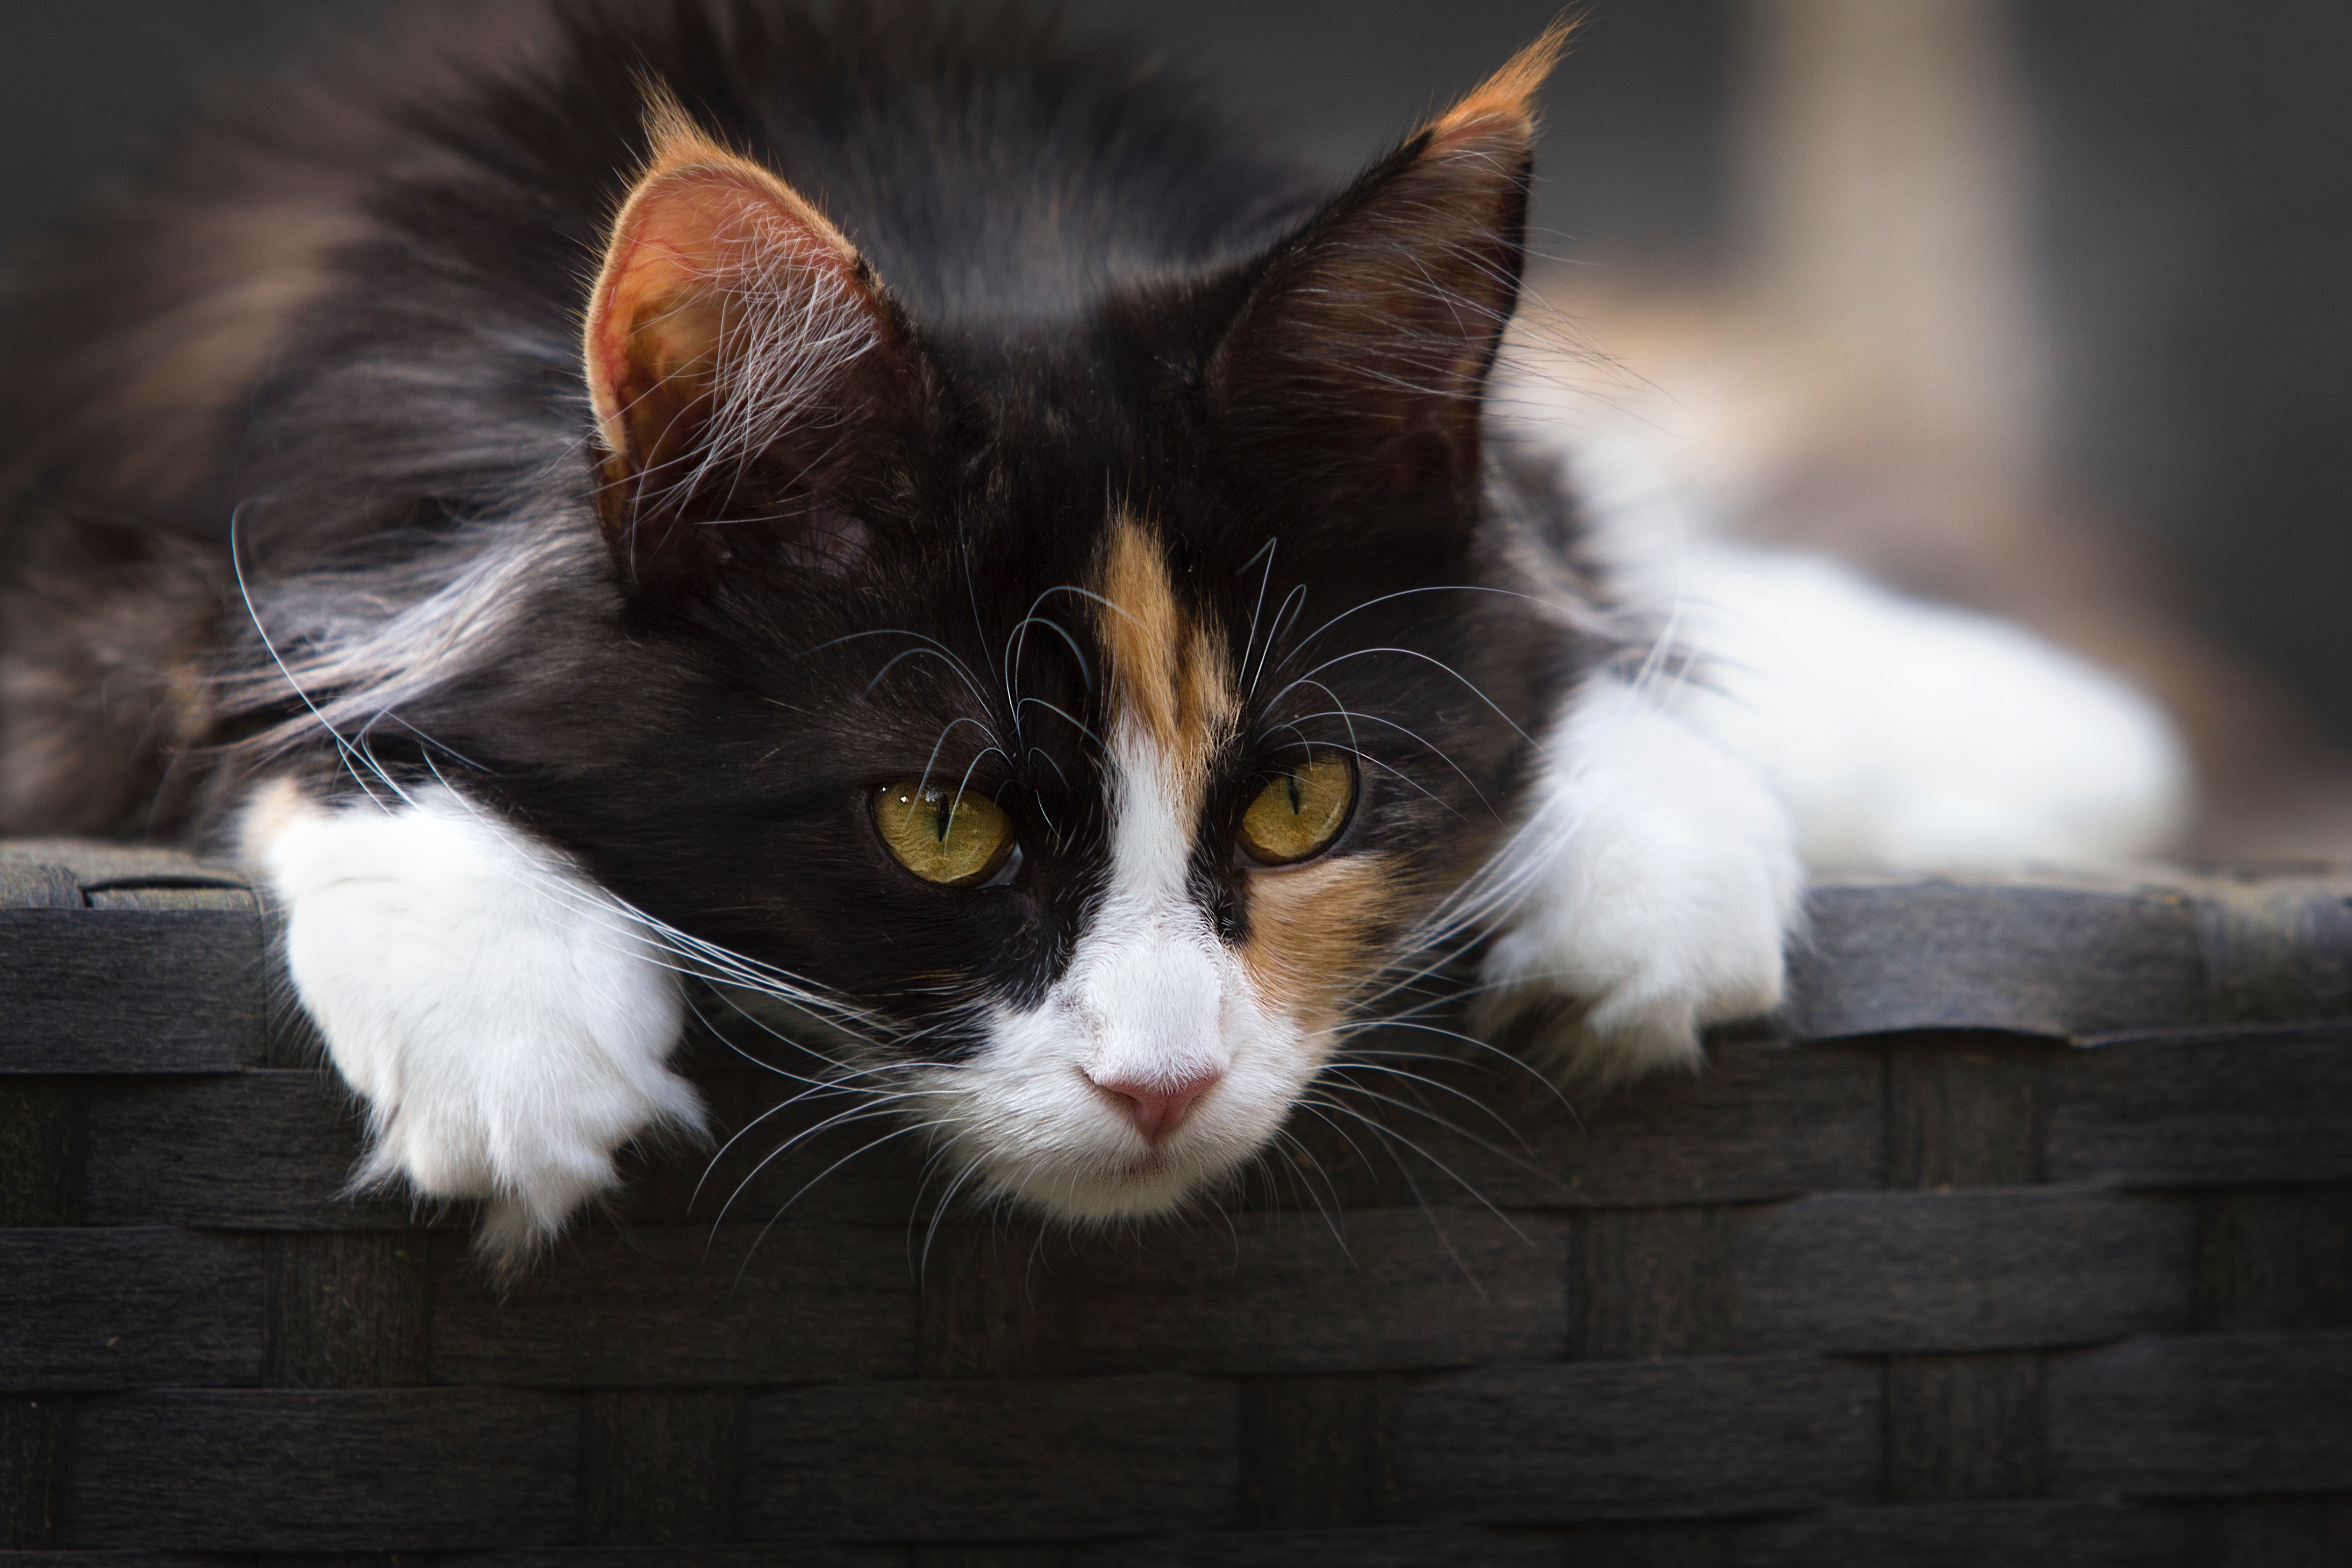 Focus Photo of Calico Cat, Adorable, Head, Whiskers, Whisker, HQ Photo